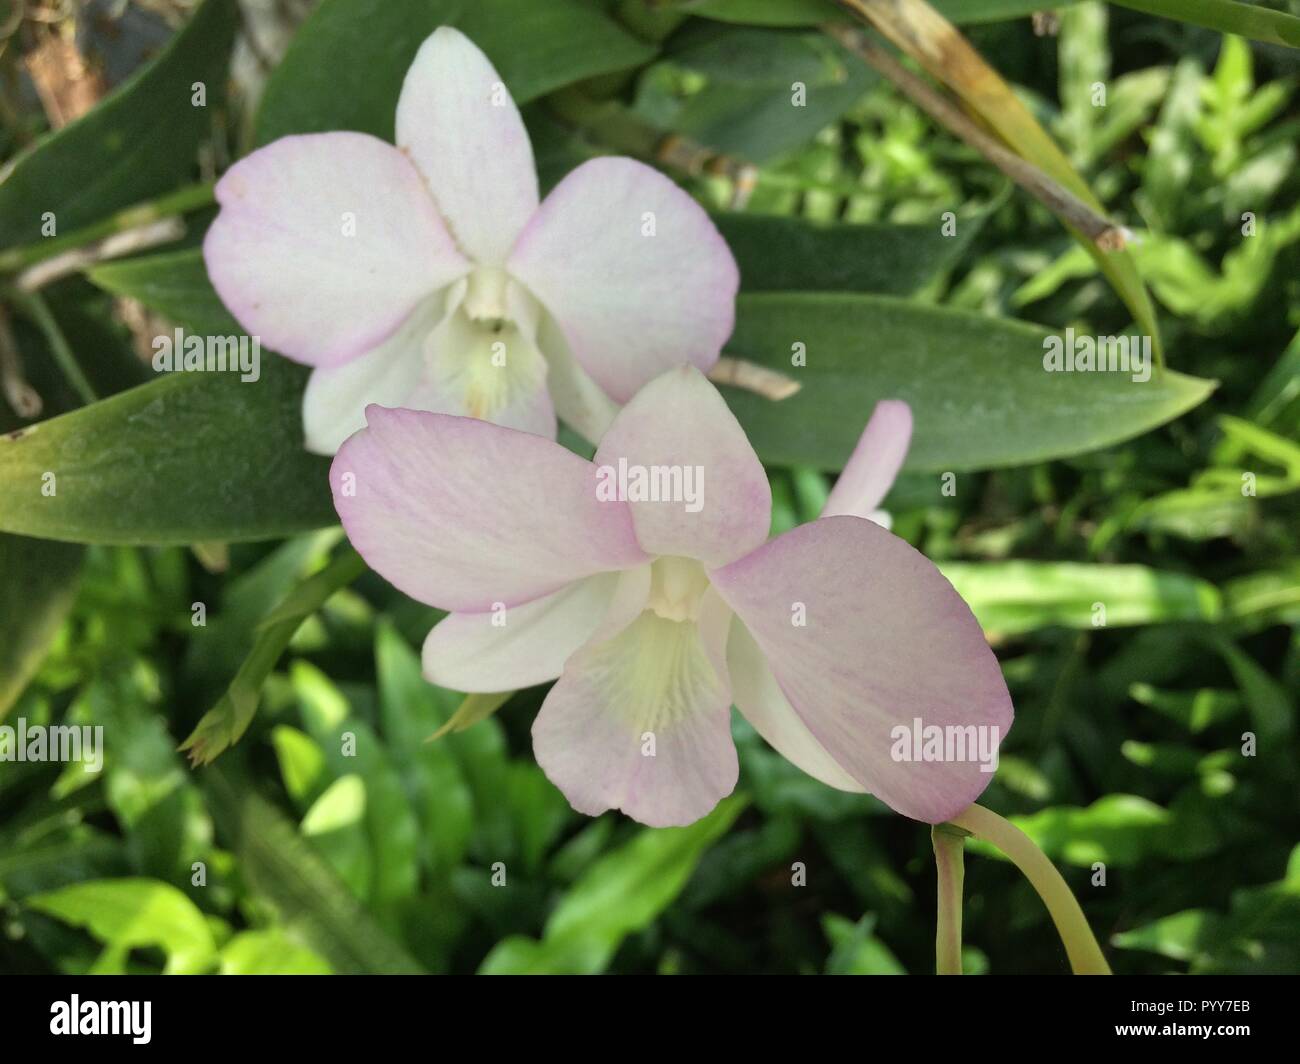 Orchid flower in garden at winter or spring day for postcard beauty and agriculture idea concept design Stock Photo